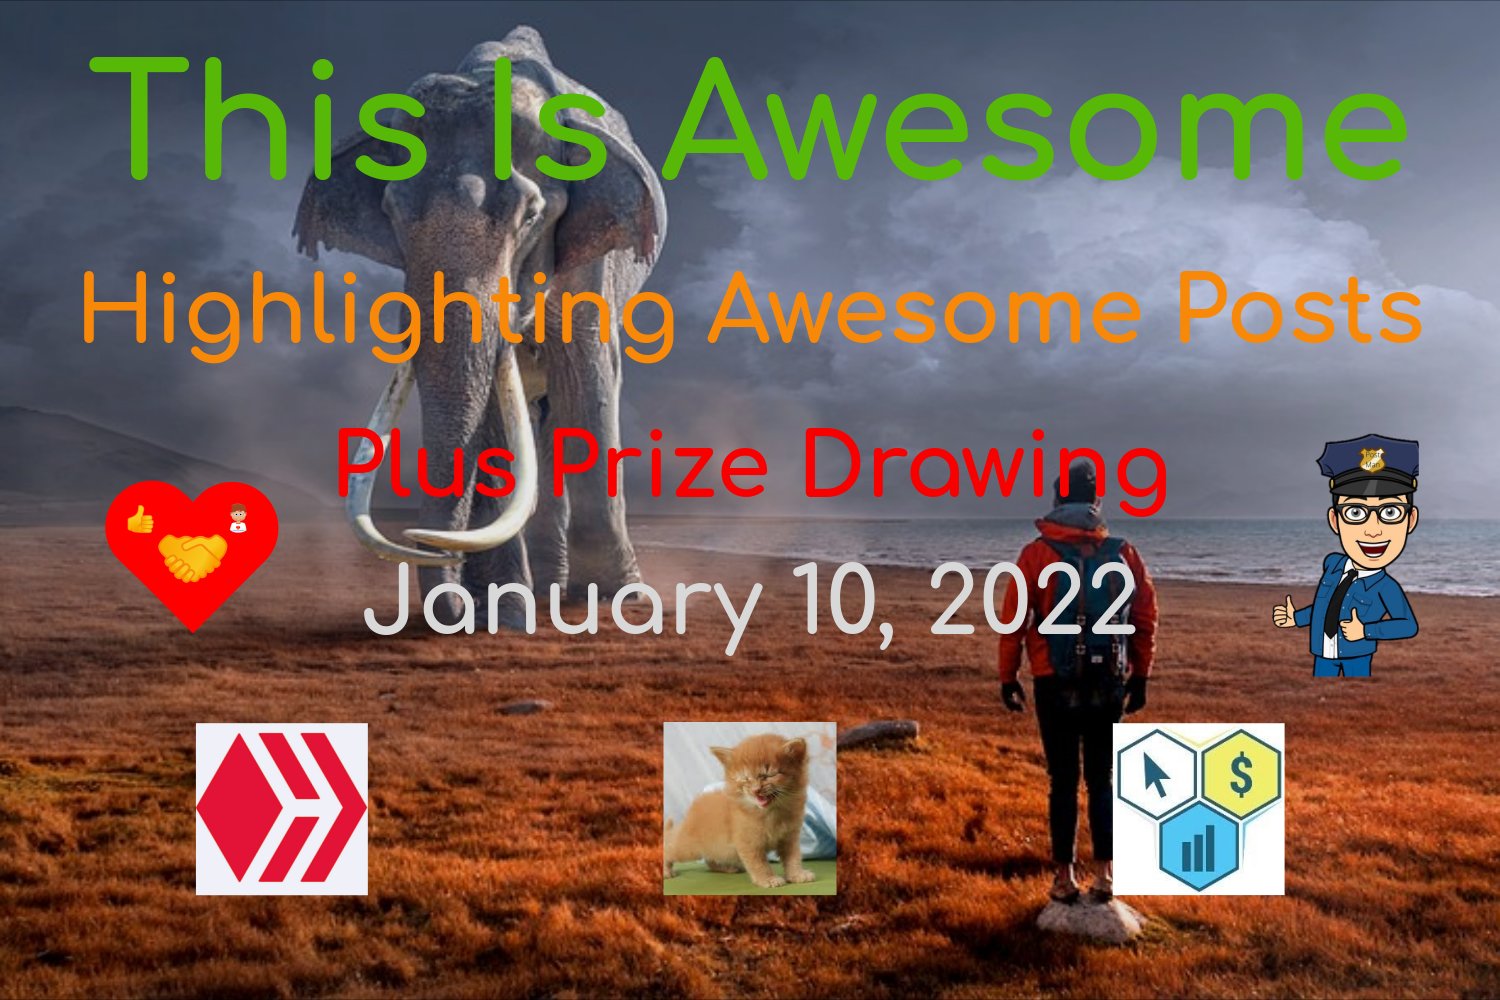 @thisisawesome/this-is-awesome-highlighting-awesome-posts-plus-prize-drawing-january-10-2022